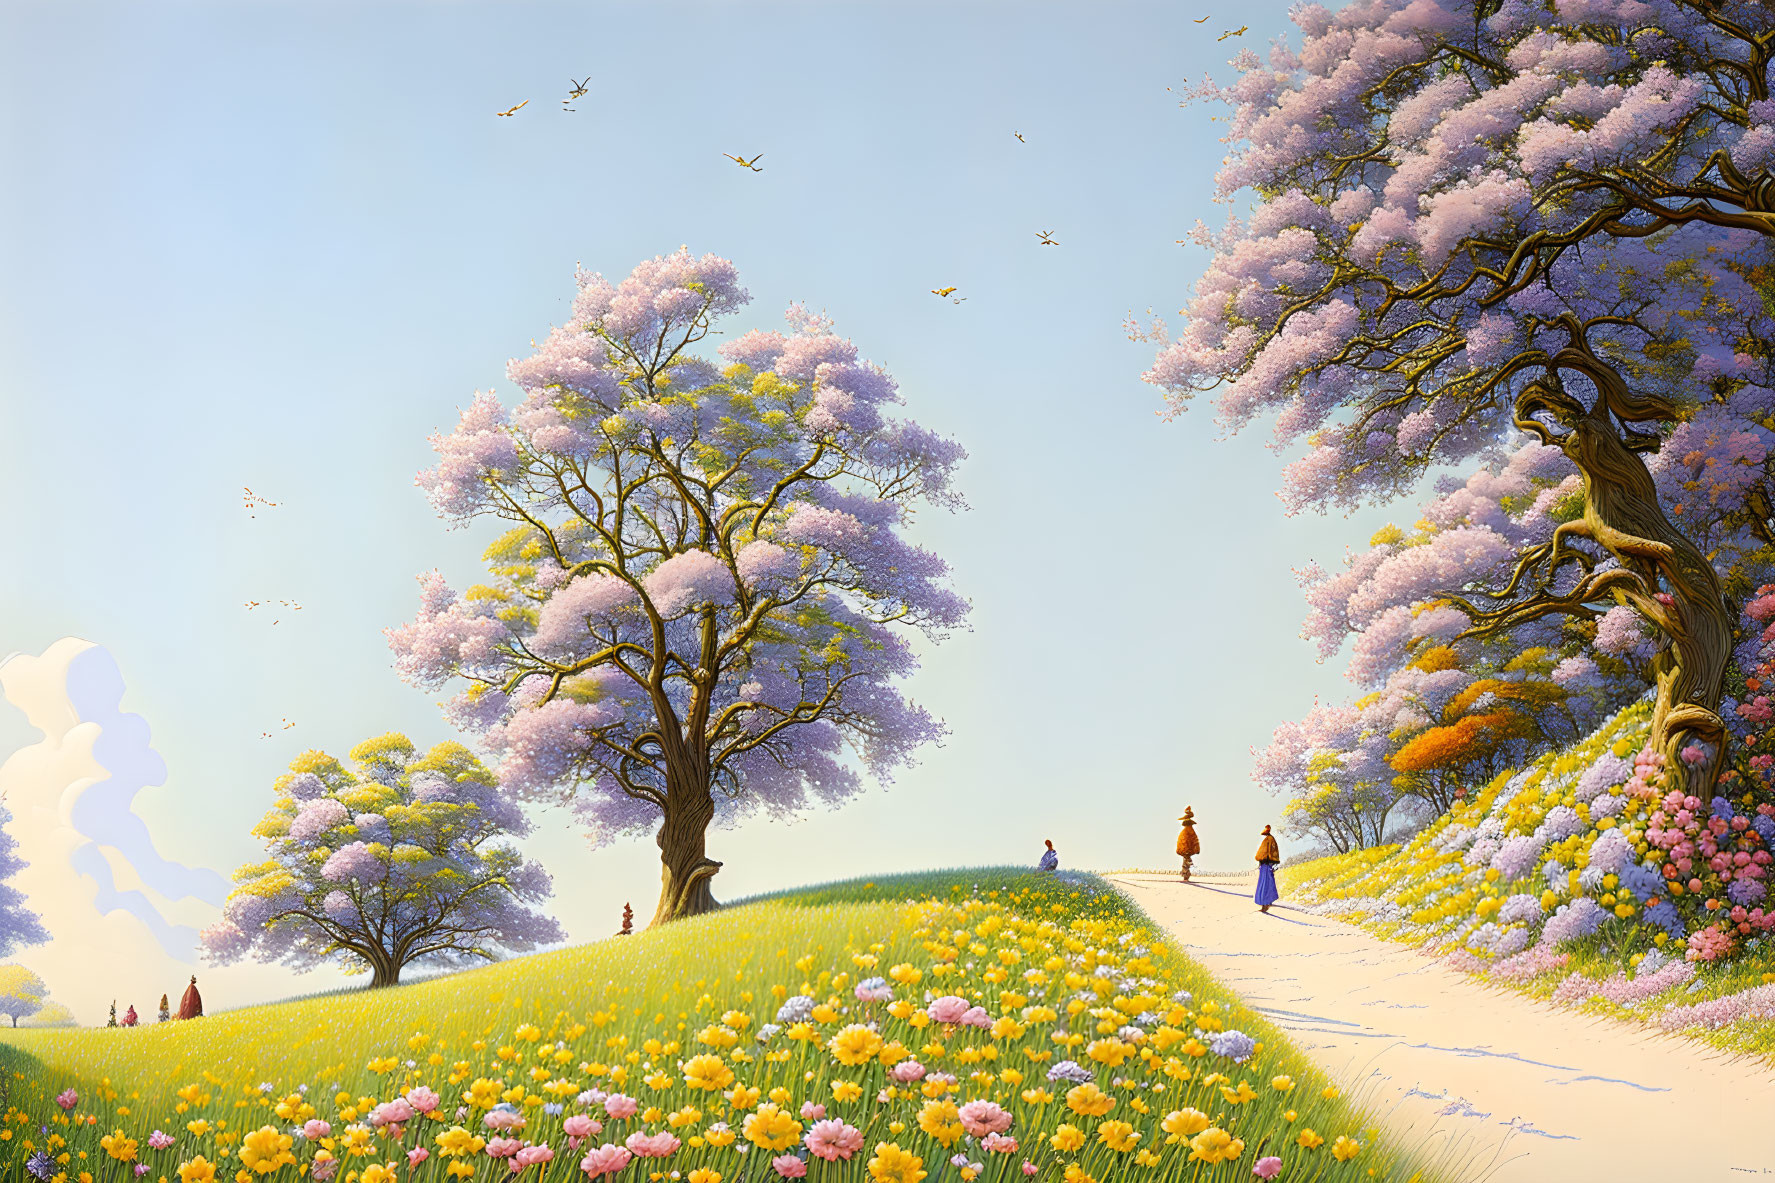 Colorful landscape with flowering trees, blue sky, and people walking along a path